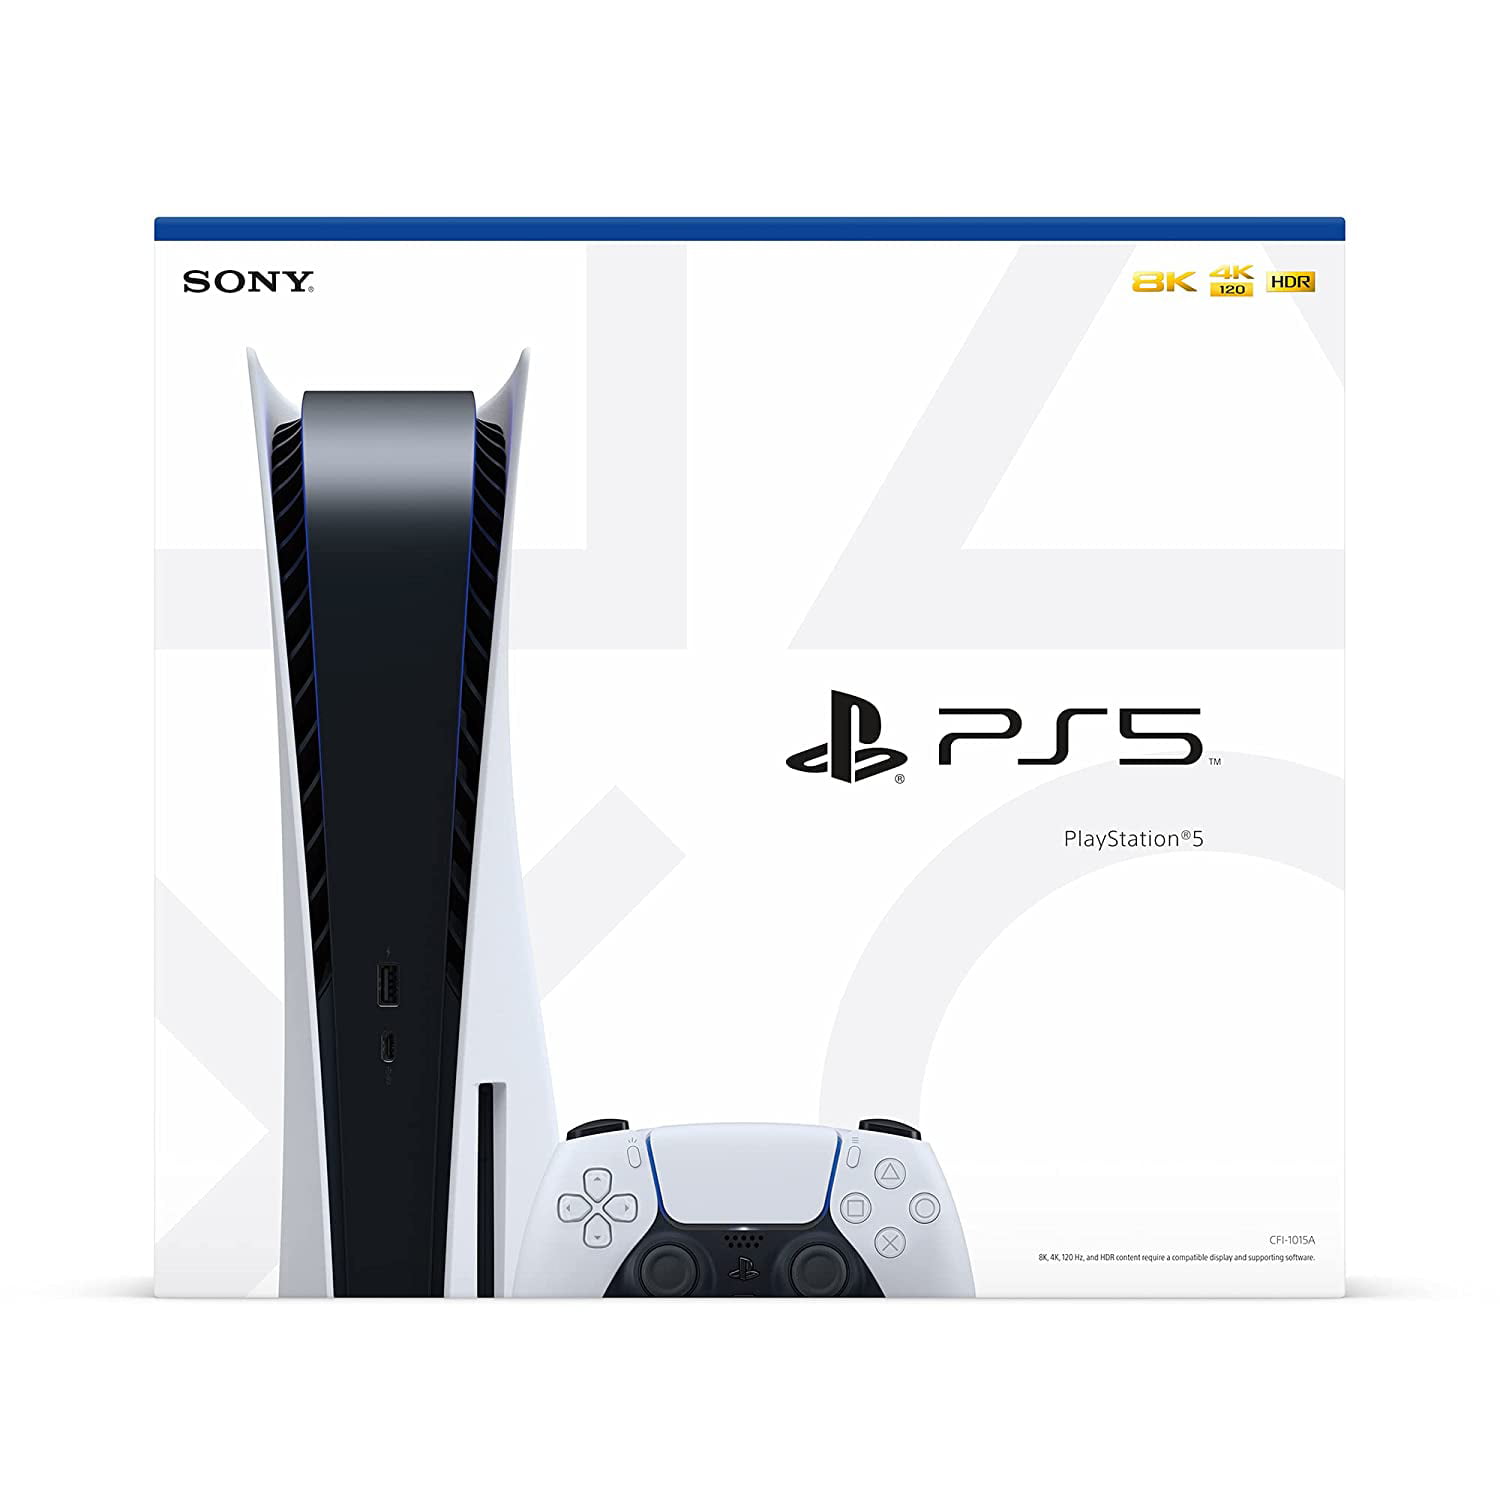 Ps5 Disc Console by Sony: Next-Gen Gaming